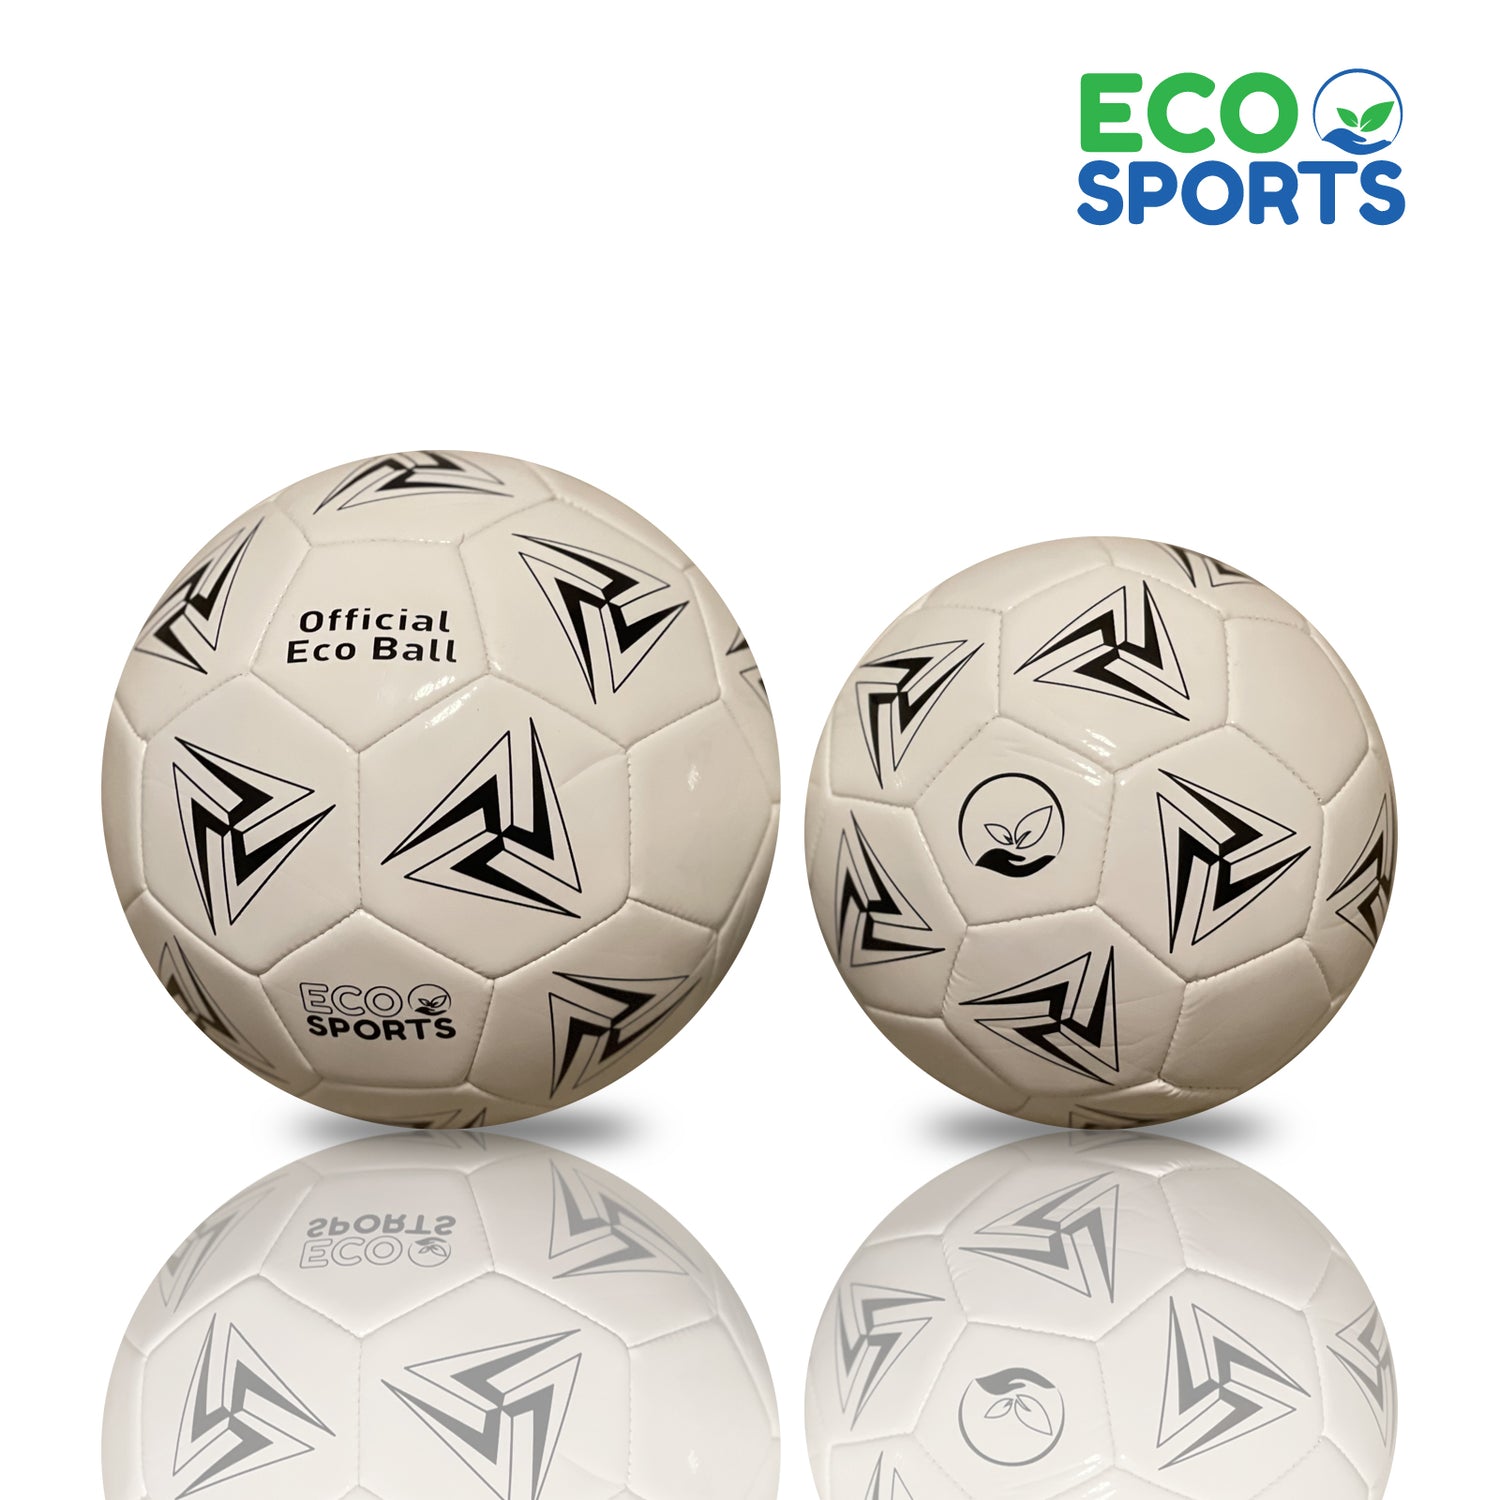 What Is a Soccer Ball Made Of - Is There An Eco Friendly Option?